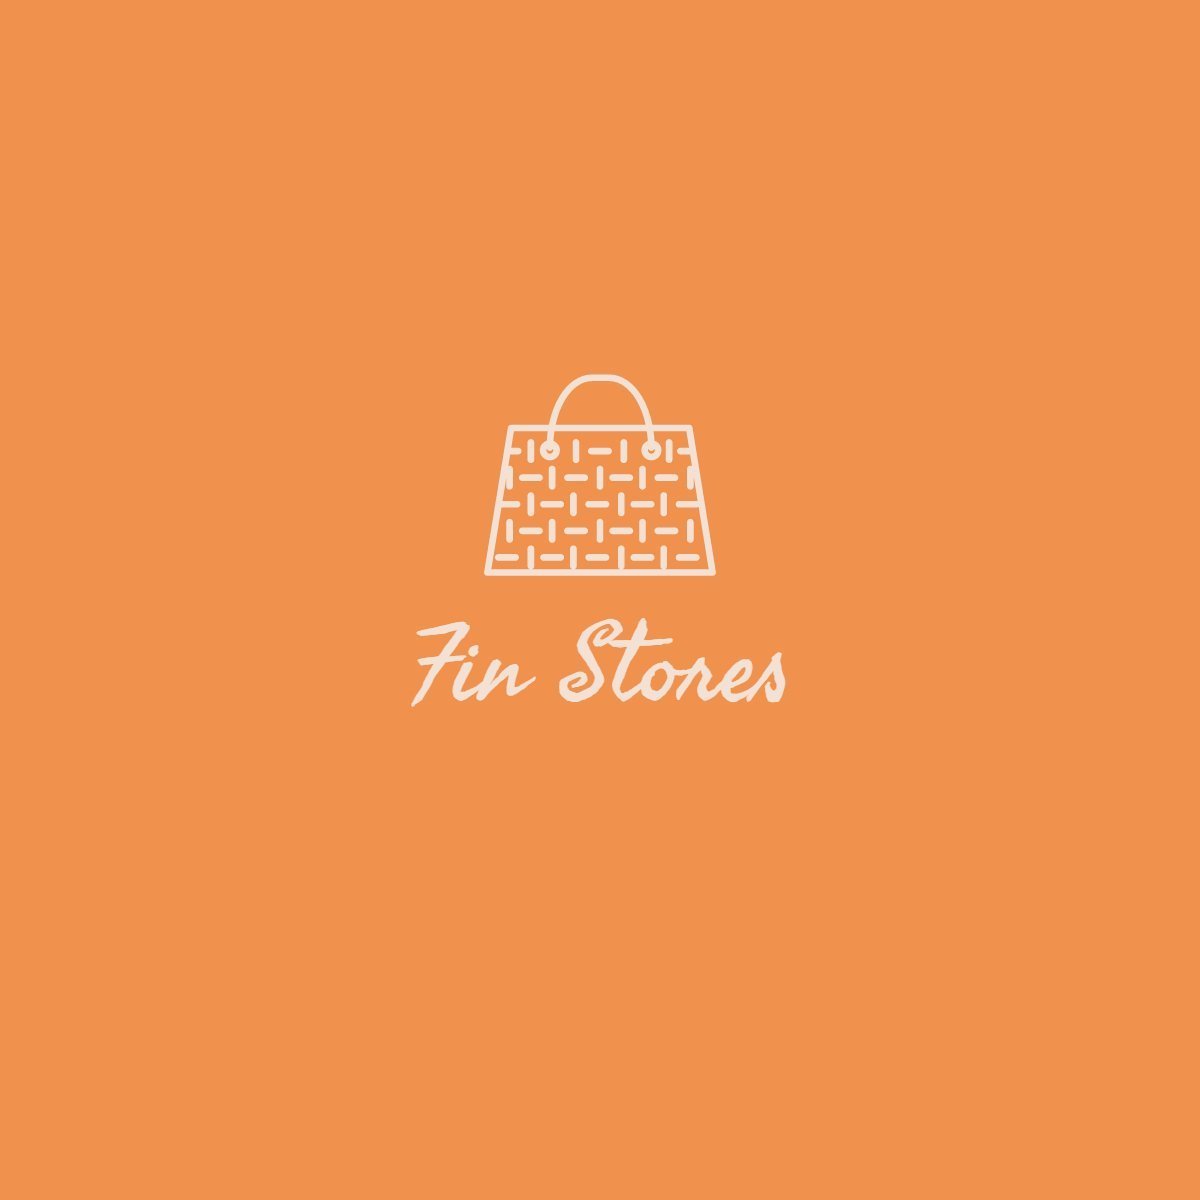 Fin Stores